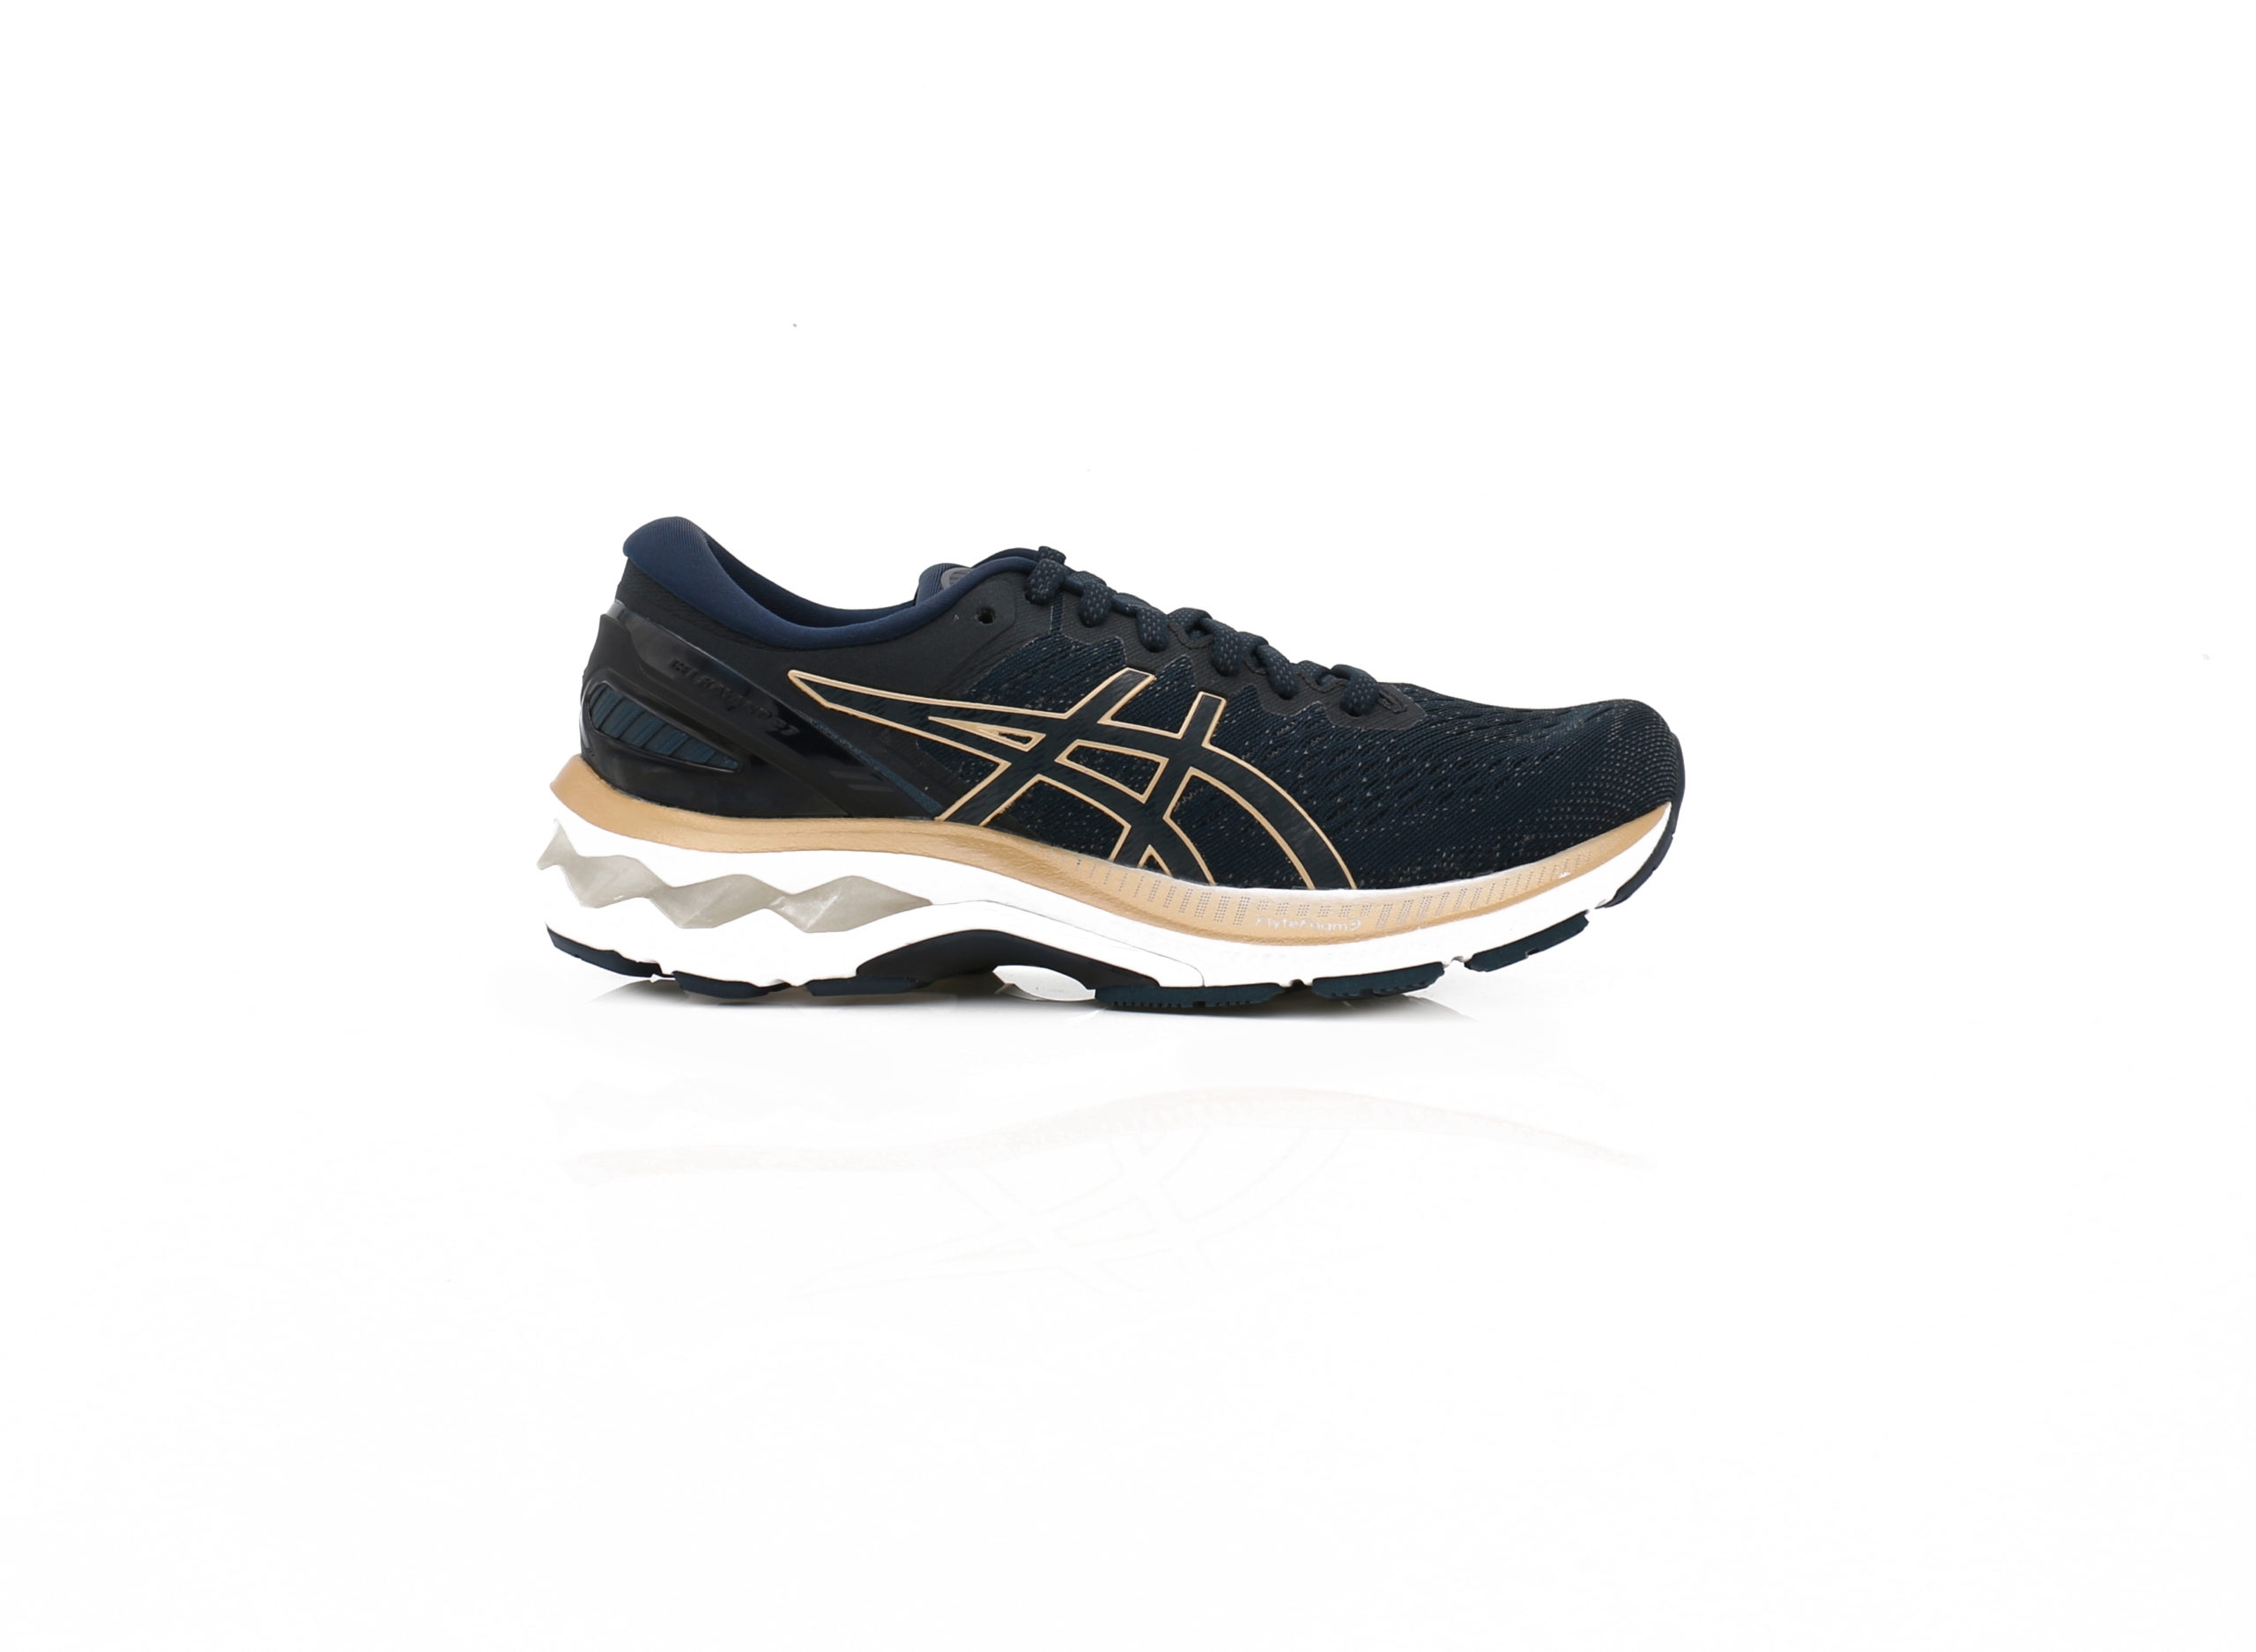 Womens Asics Gel Kayano 27 – Navy Running Trainers – Suitable For Achilles Pain / Collapsed Arches – Size 10 – Gold / Navy Blue – Synthetic Fabric